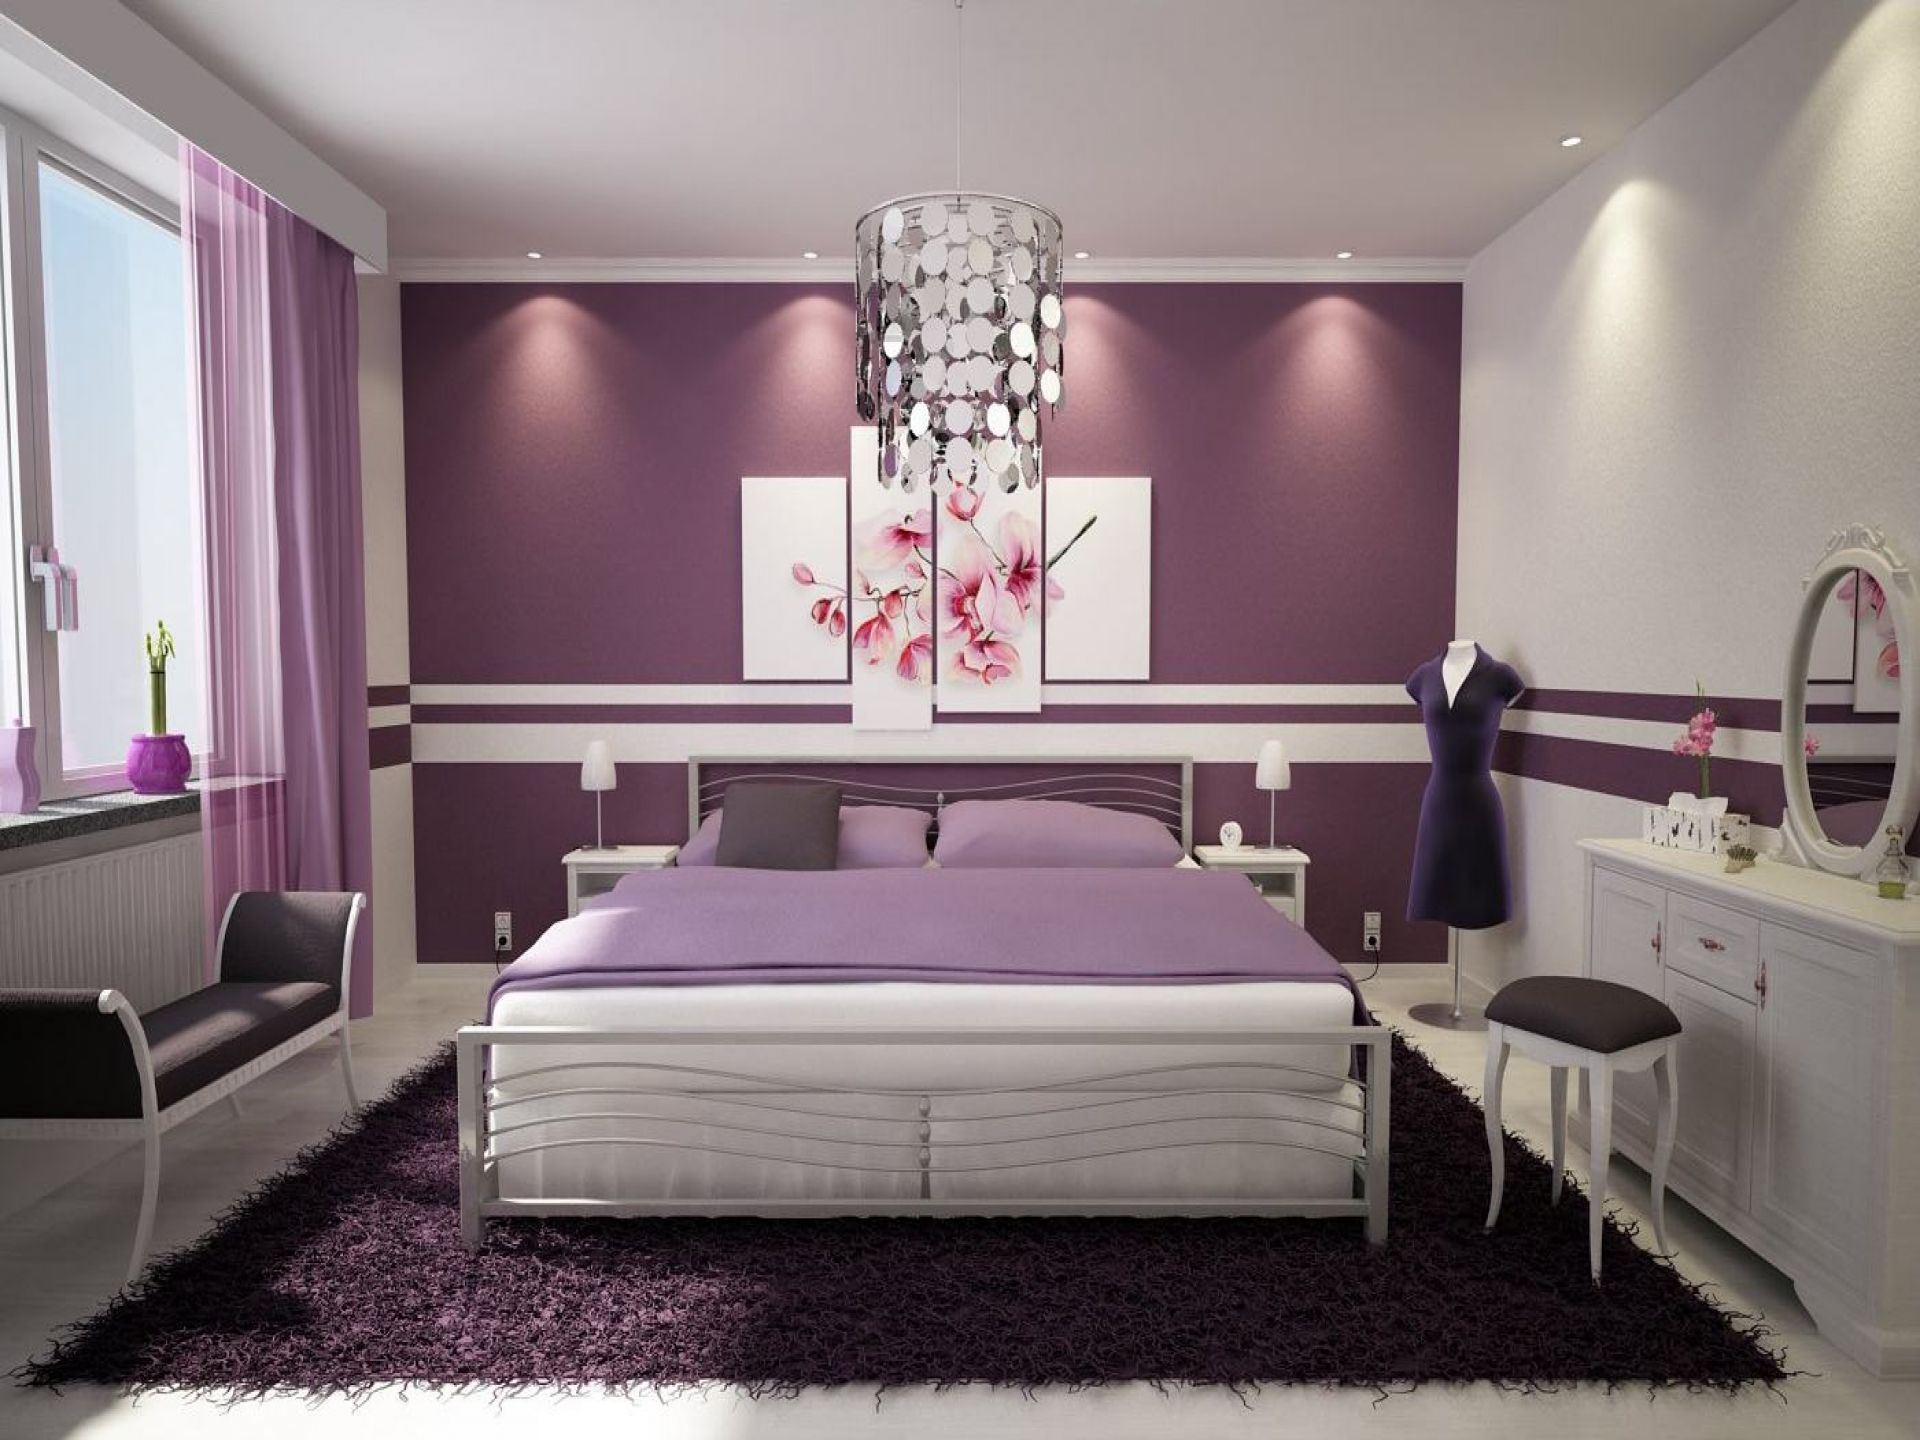 10 Best Black And Purple Bedroom Ideas 23 inspirational purple interior designs you must see 3 2022